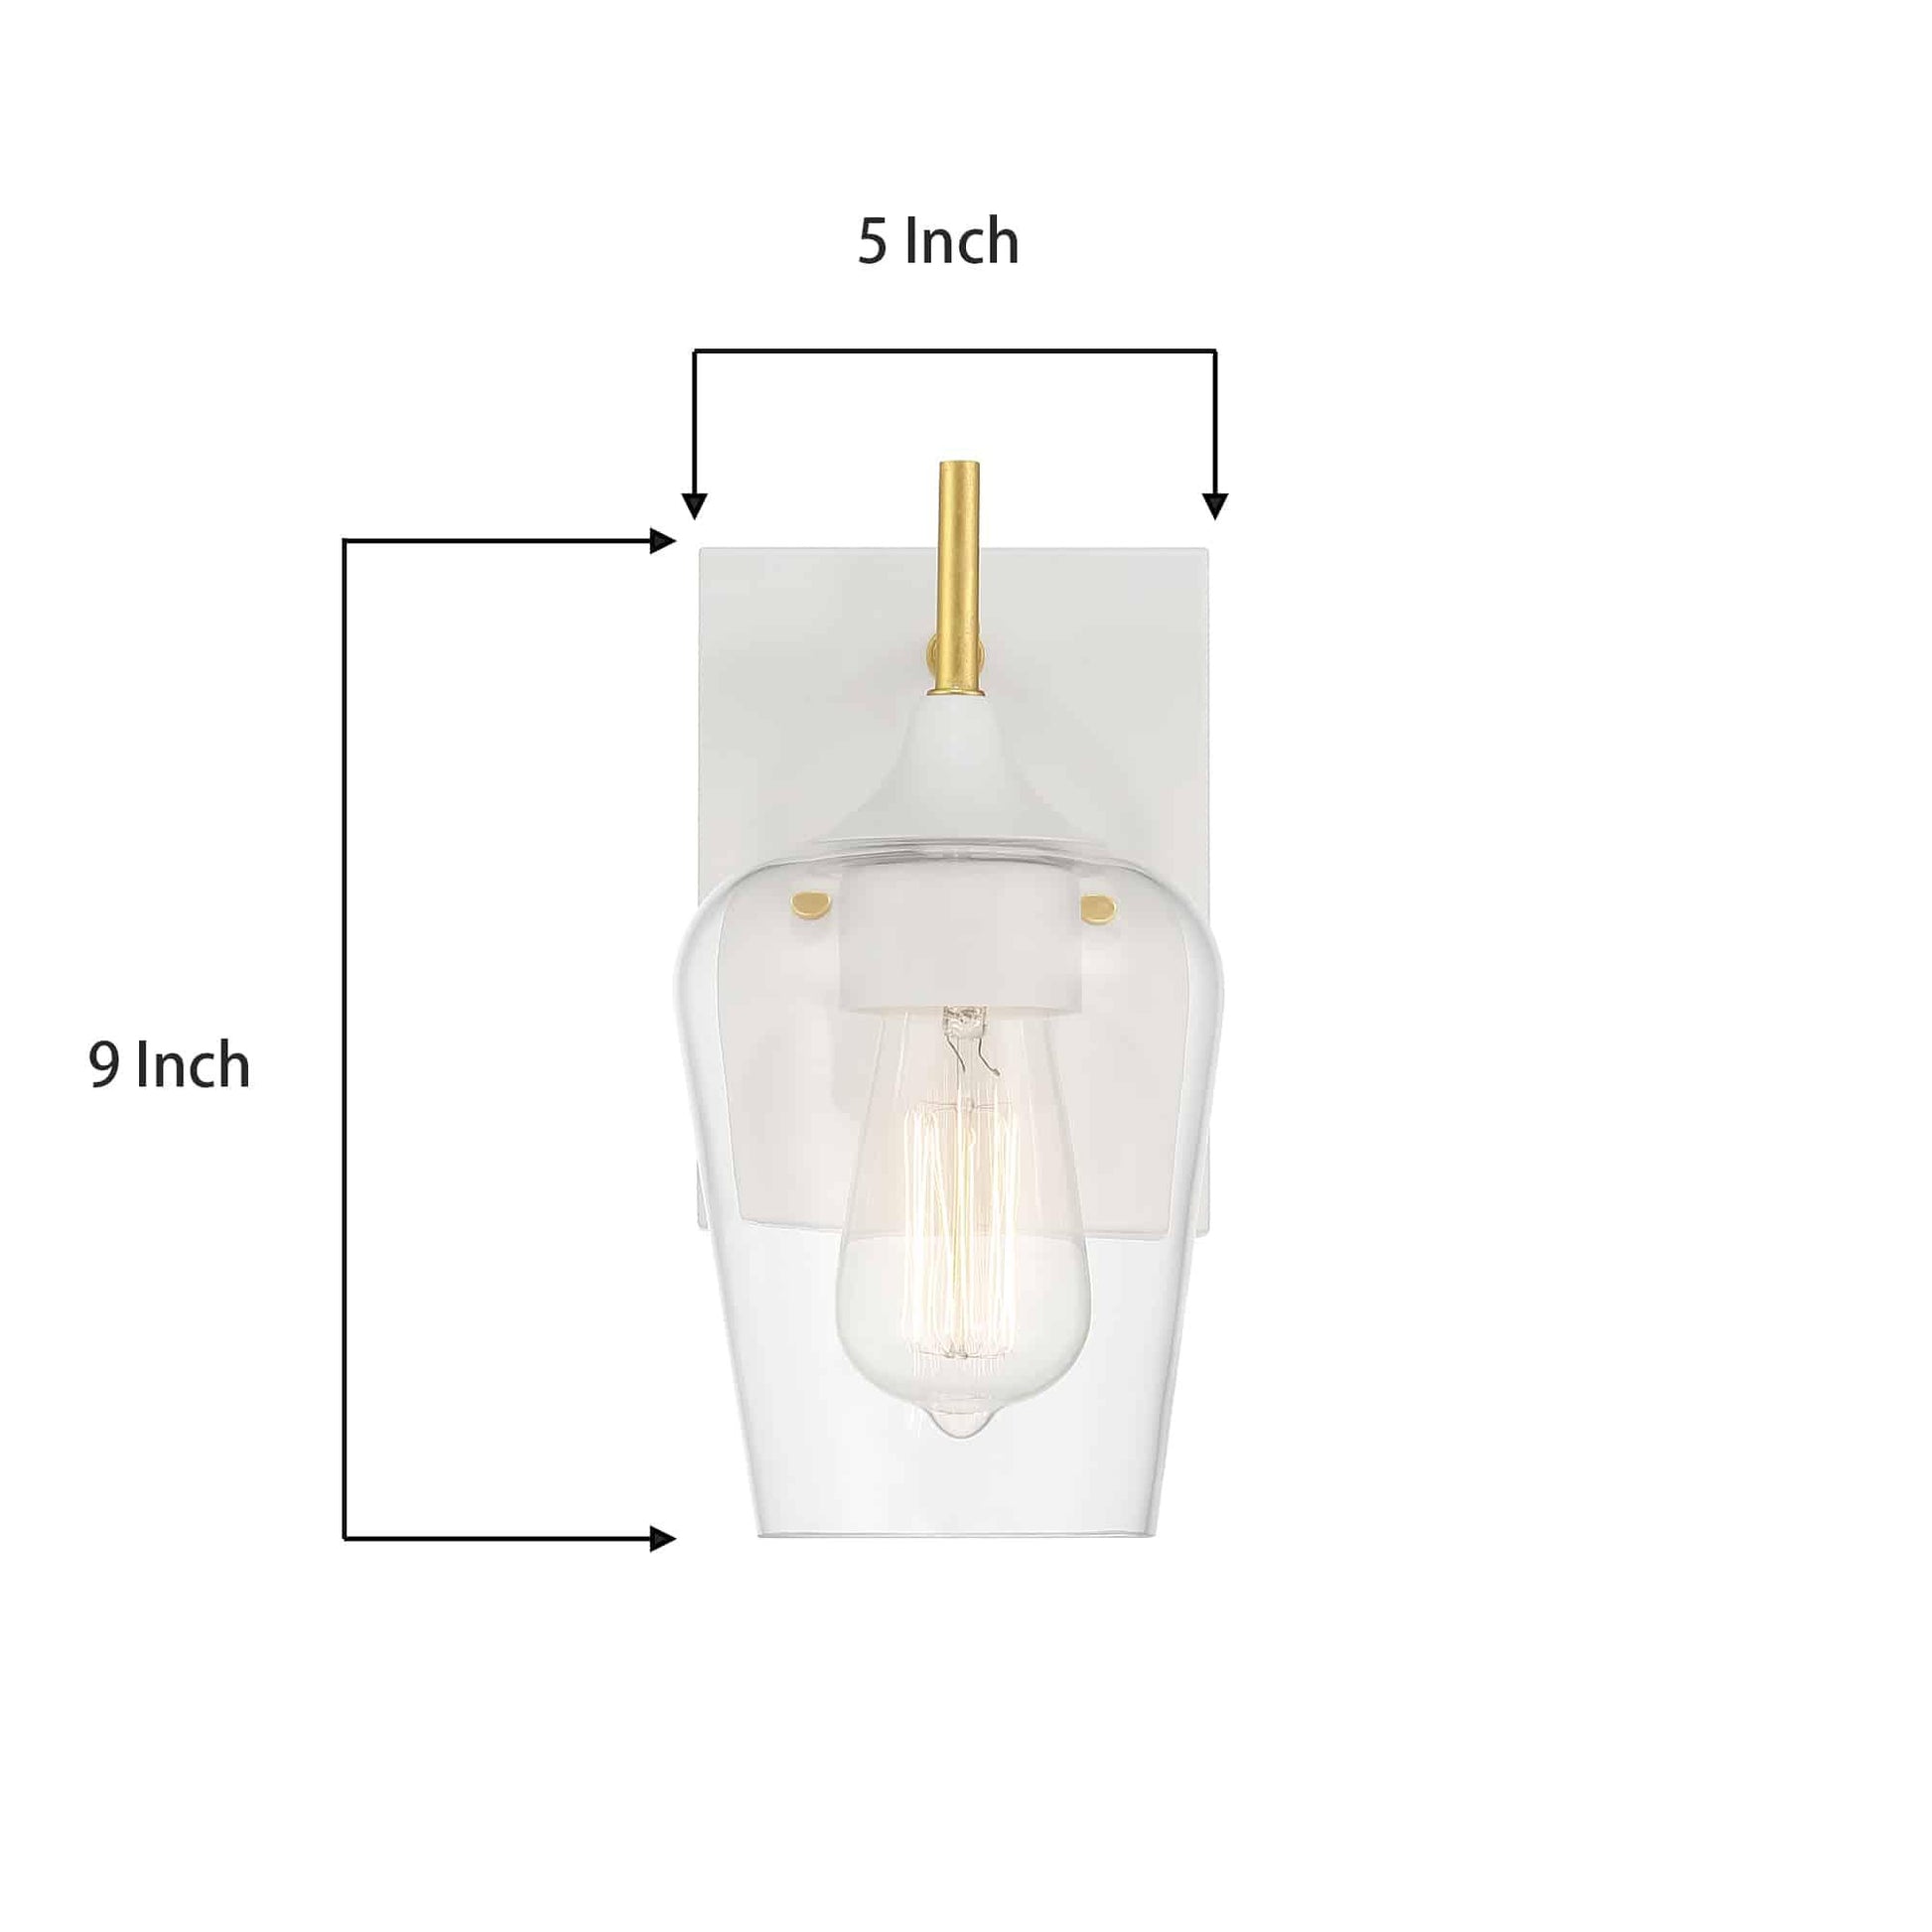 1 light glass wall sconce set of 2 (36) by ACROMA